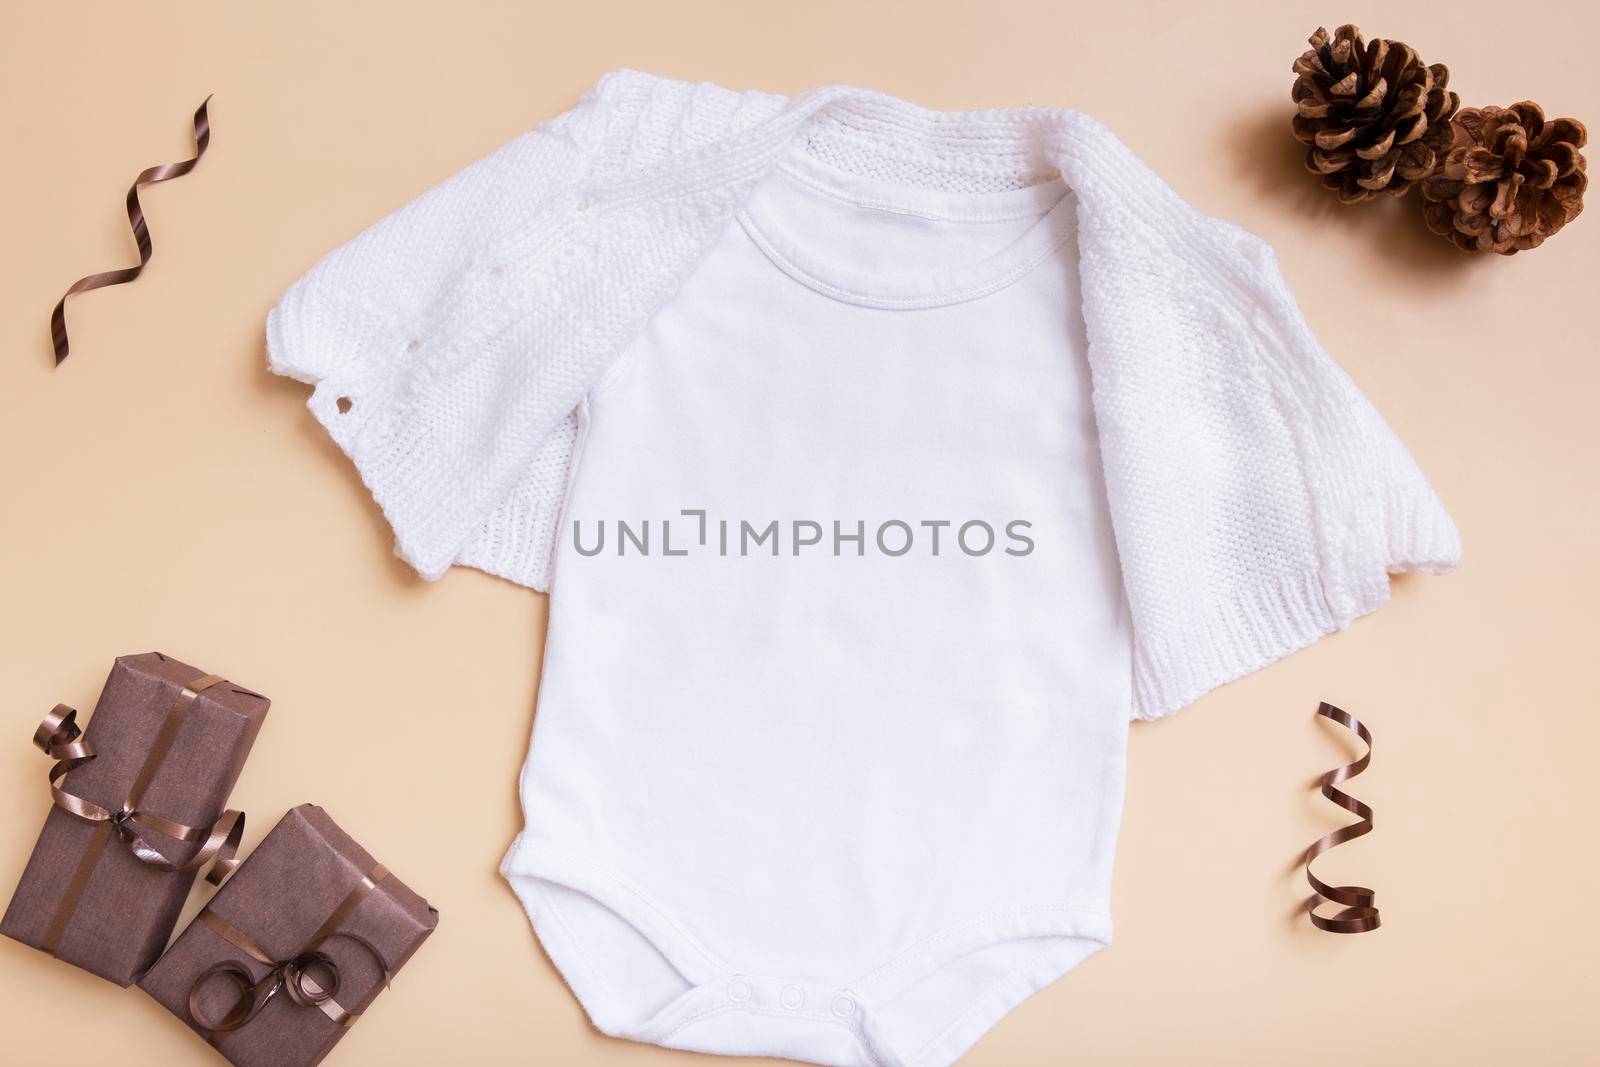 White baby bodysuit mockup for logo, text or design on beige background with winter decotations top view by ssvimaliss